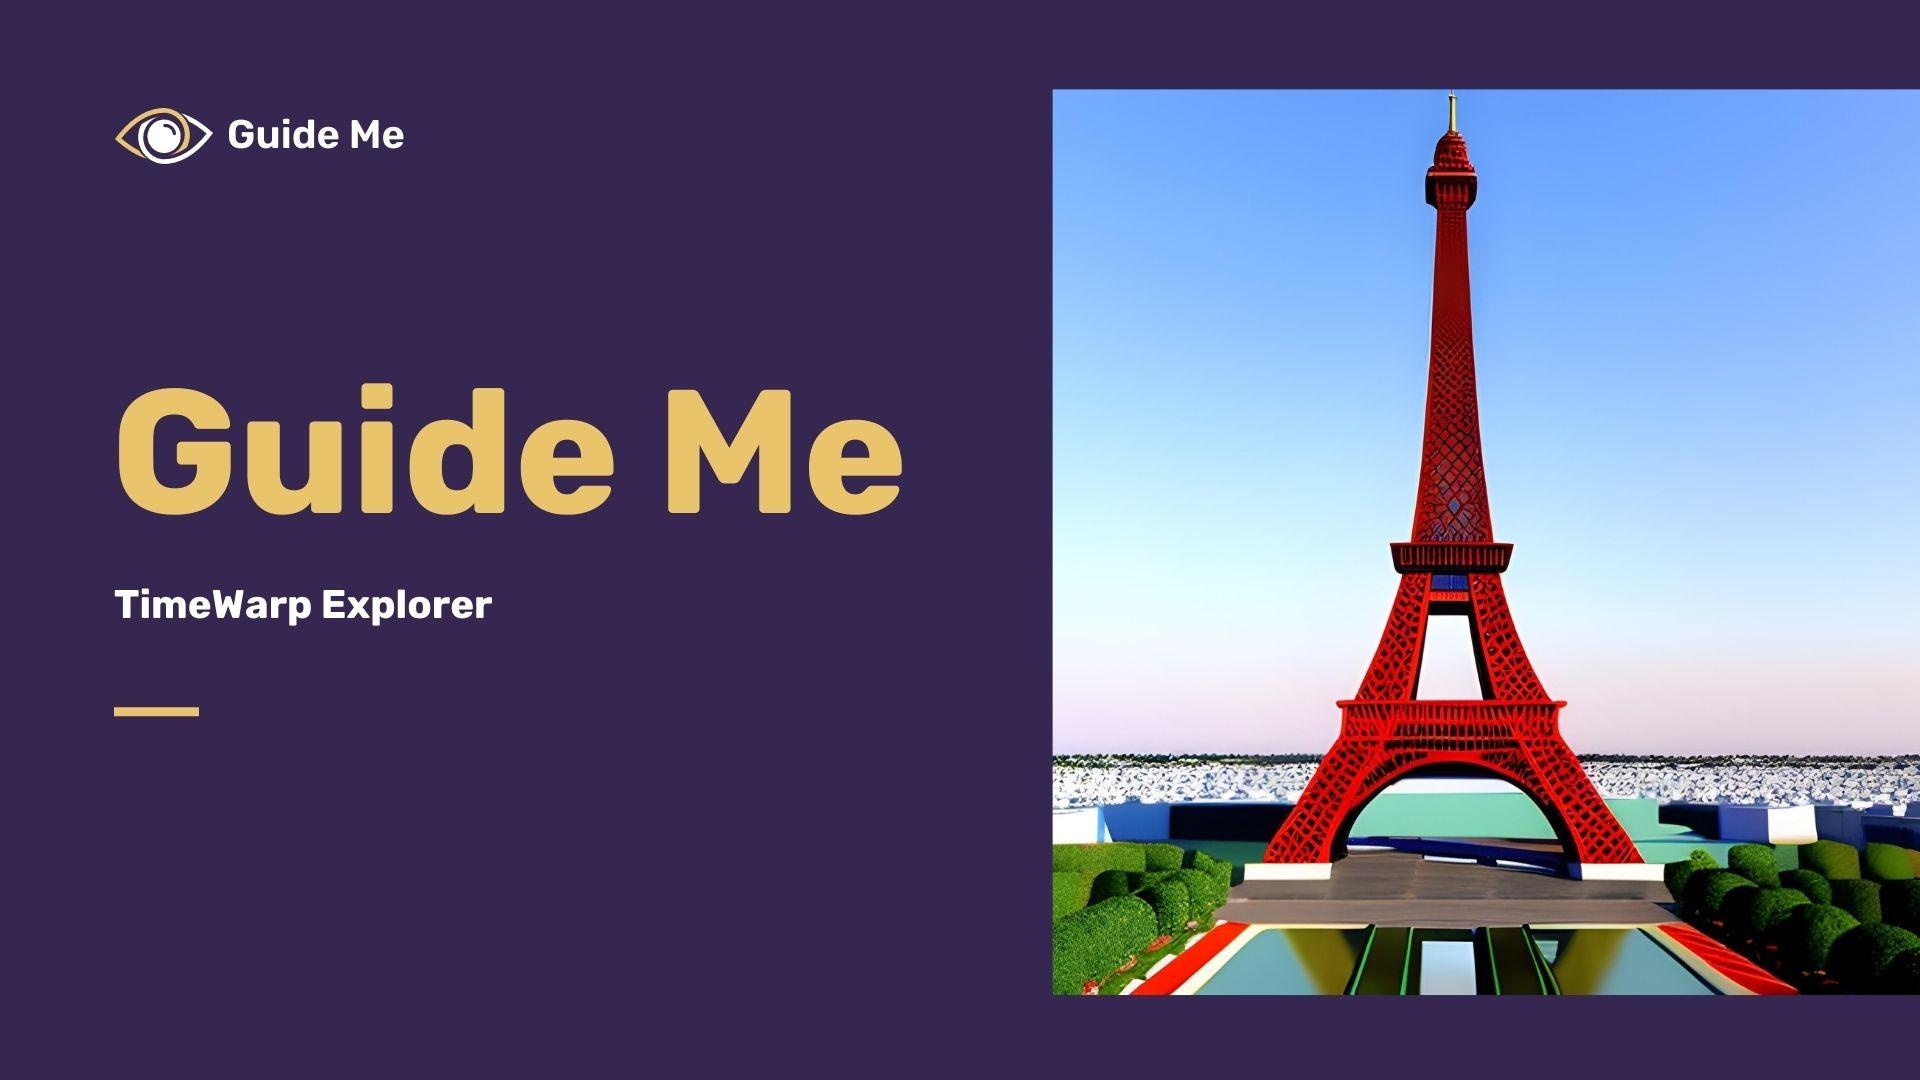 guide me- Historical tour guide